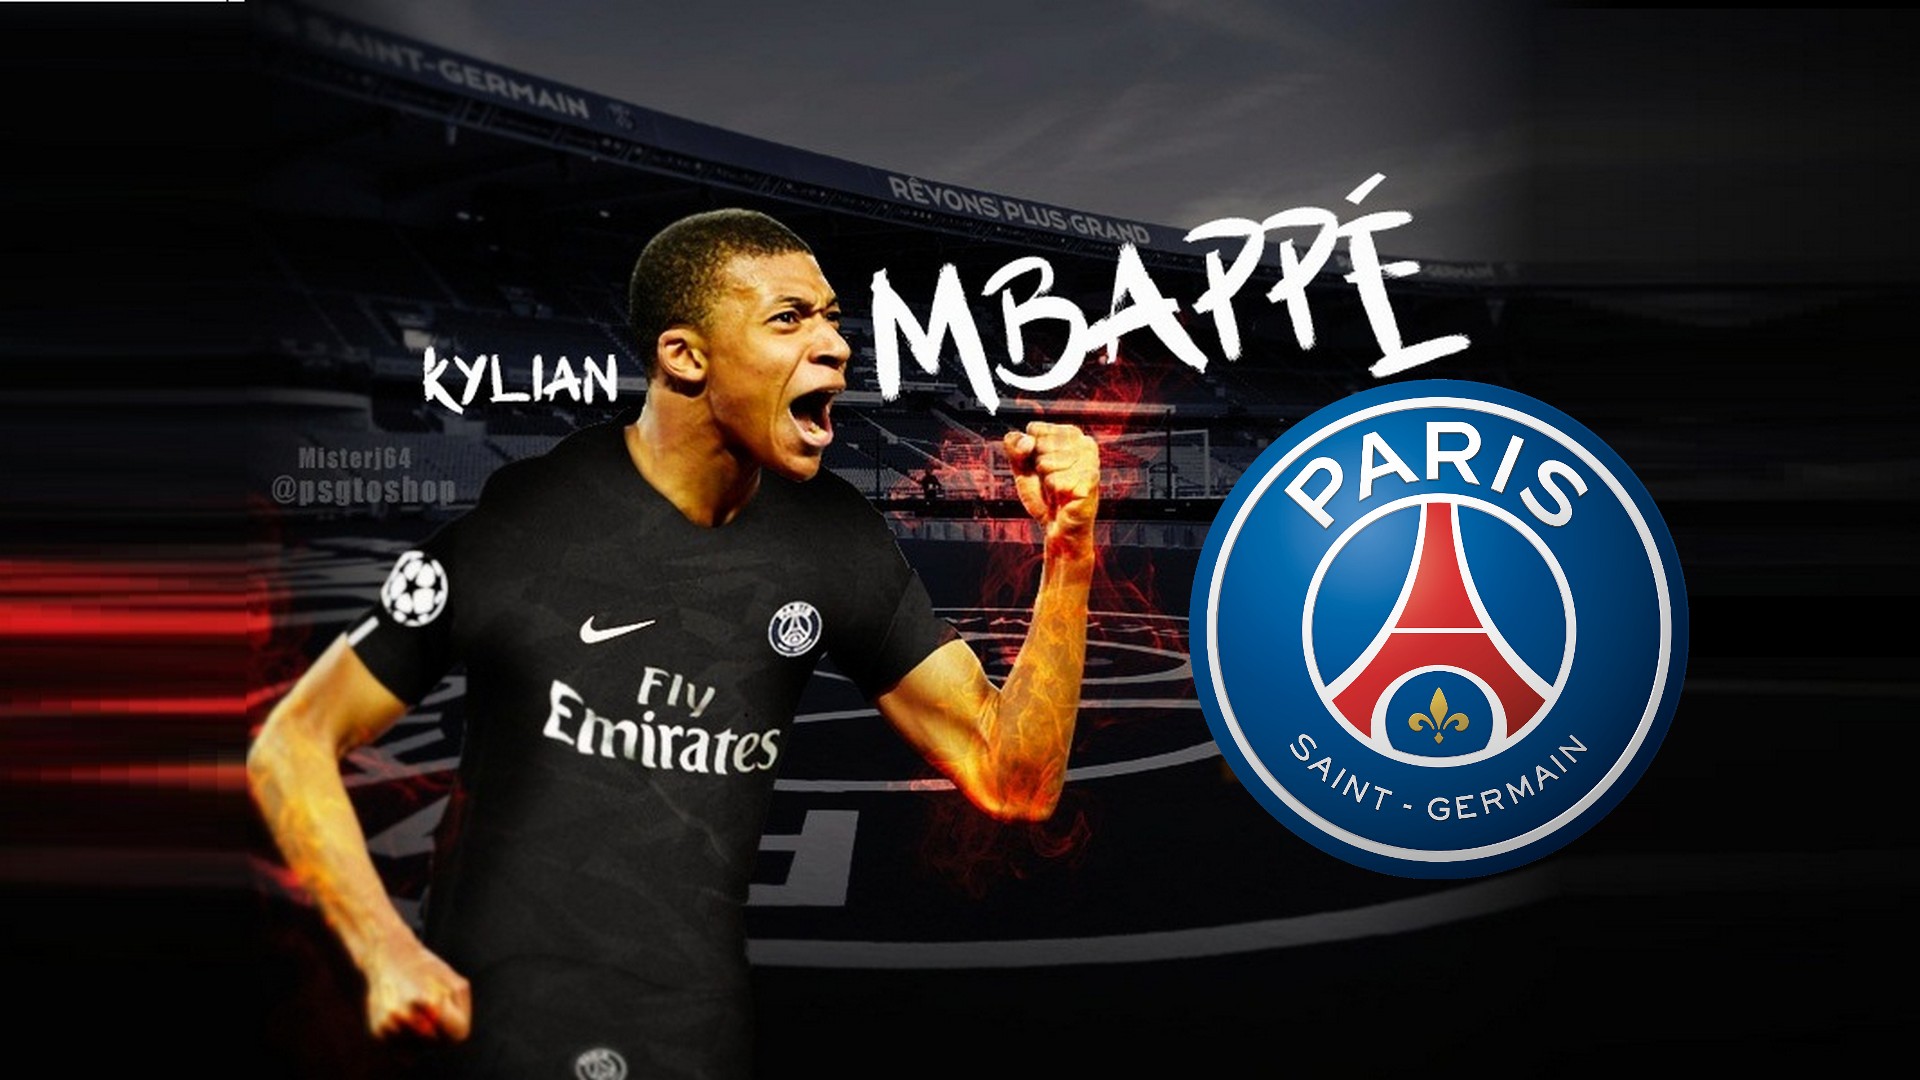 PSG Kylian Mbappe Mac Backgrounds with resolution 1920x1080 pixel. You can make this wallpaper for your Mac or Windows Desktop Background, iPhone, Android or Tablet and another Smartphone device